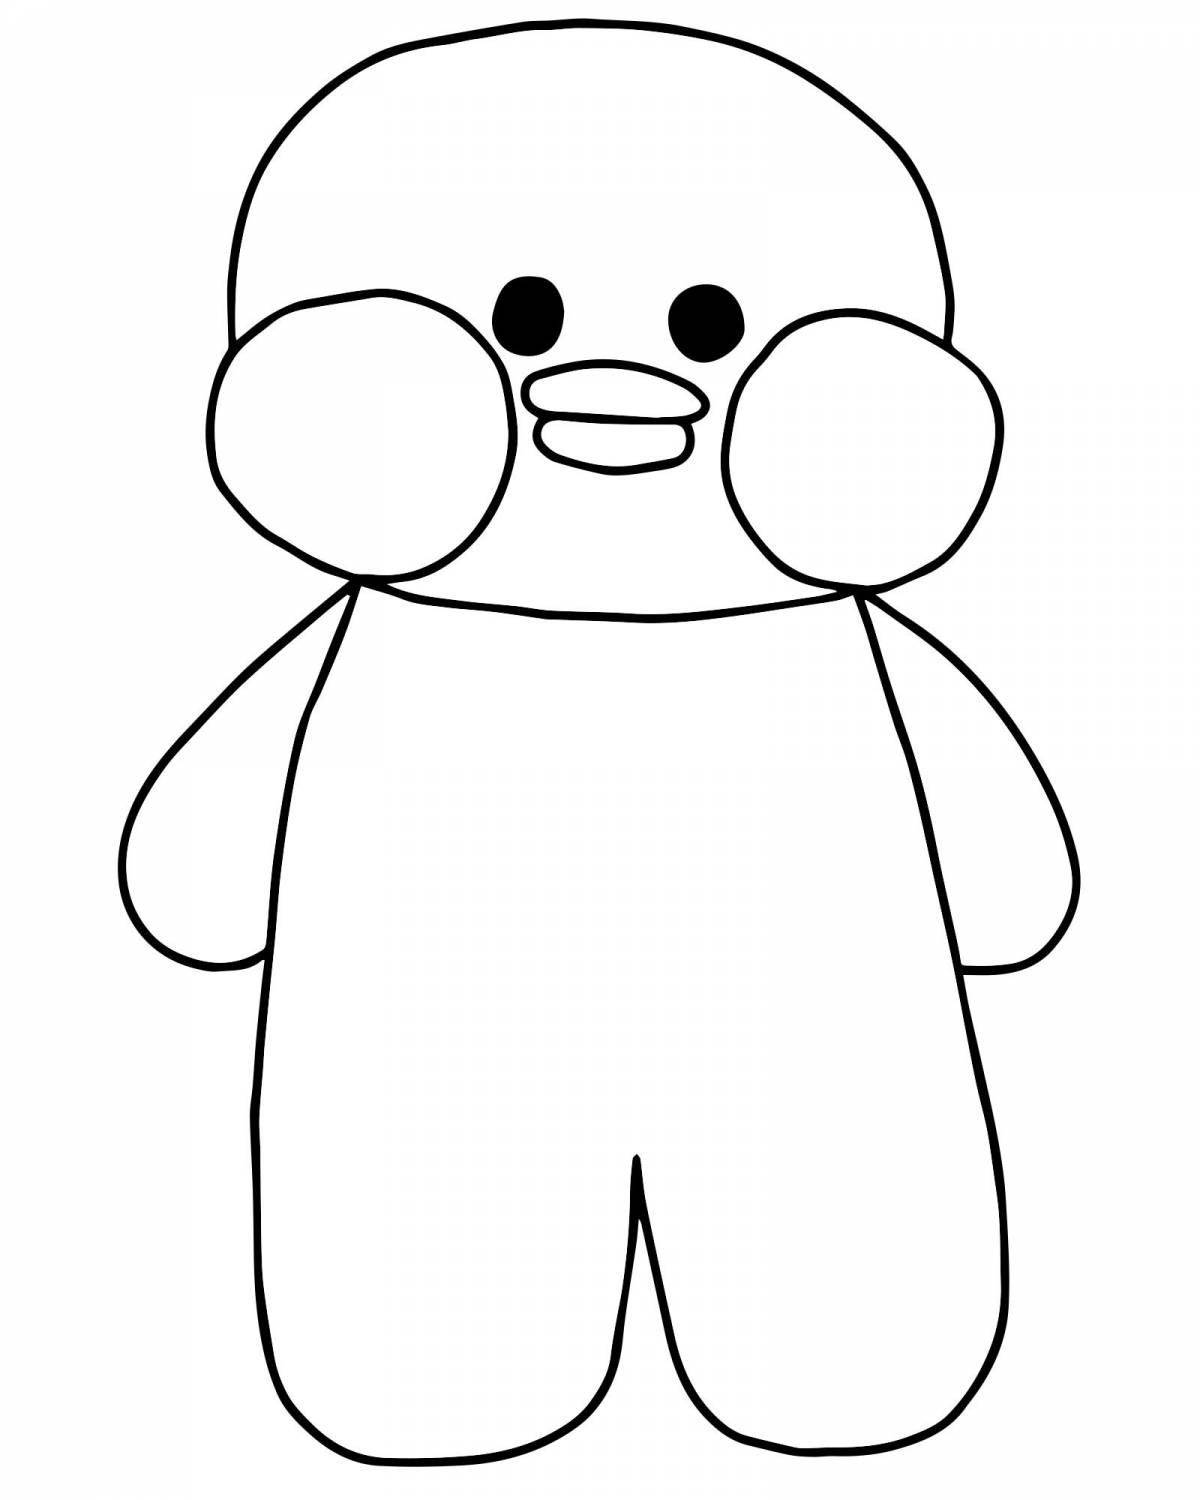 Lolofan duck colorful coloring page